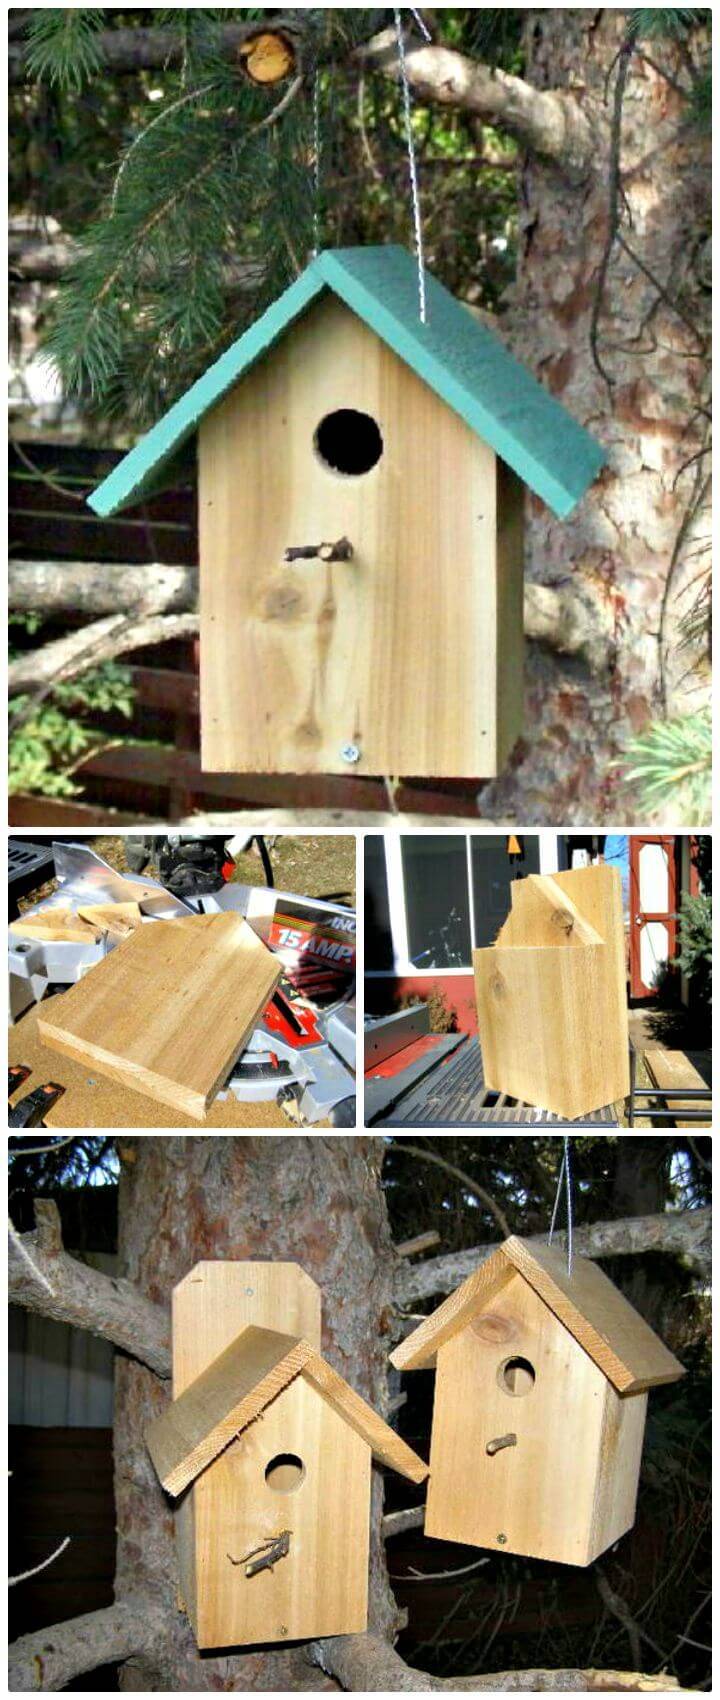 How To Build a Birdhouse Under $2 Tutorial